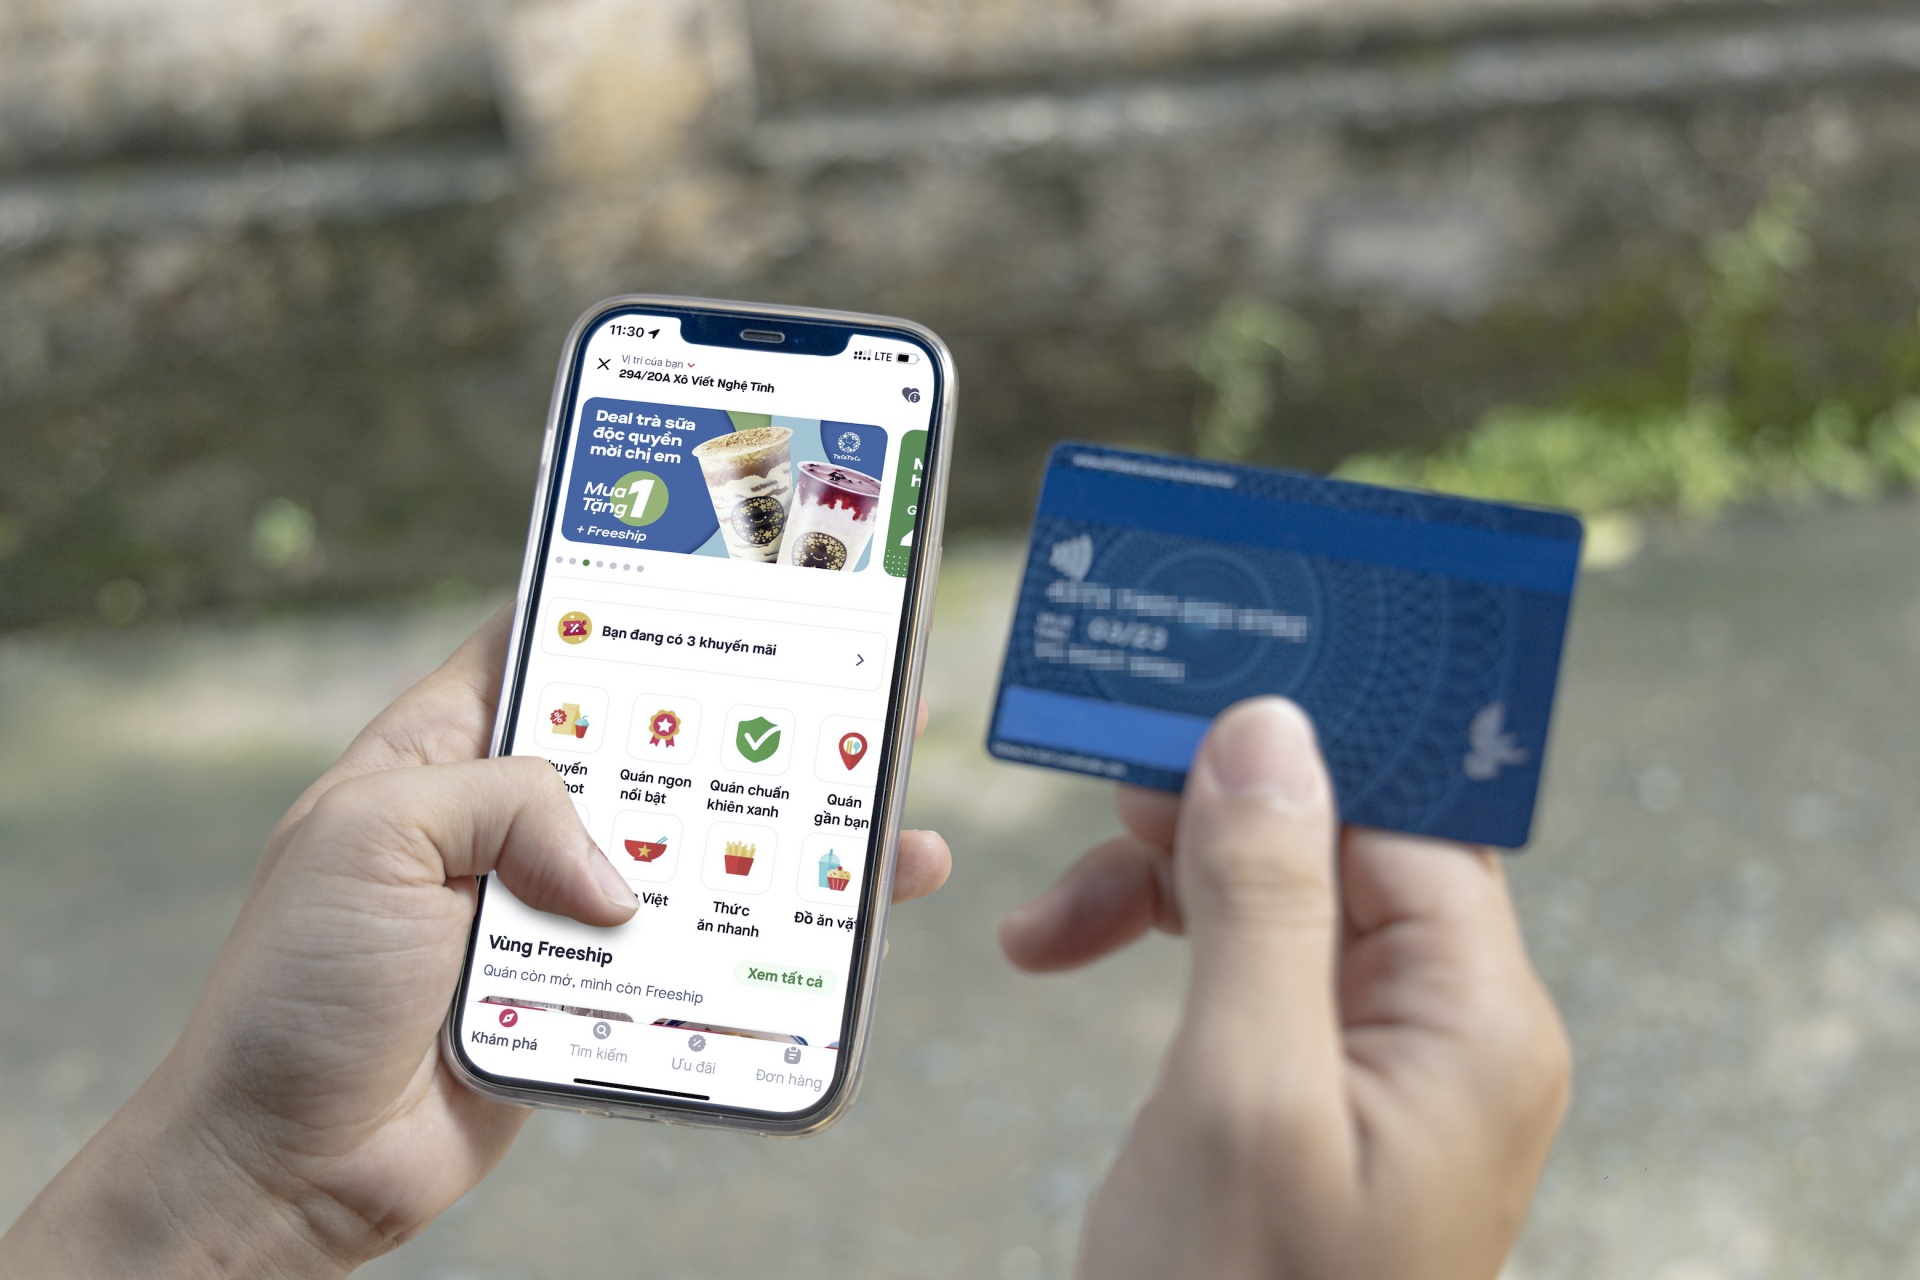 Gojek rolls out cashless payment services in Vietnam